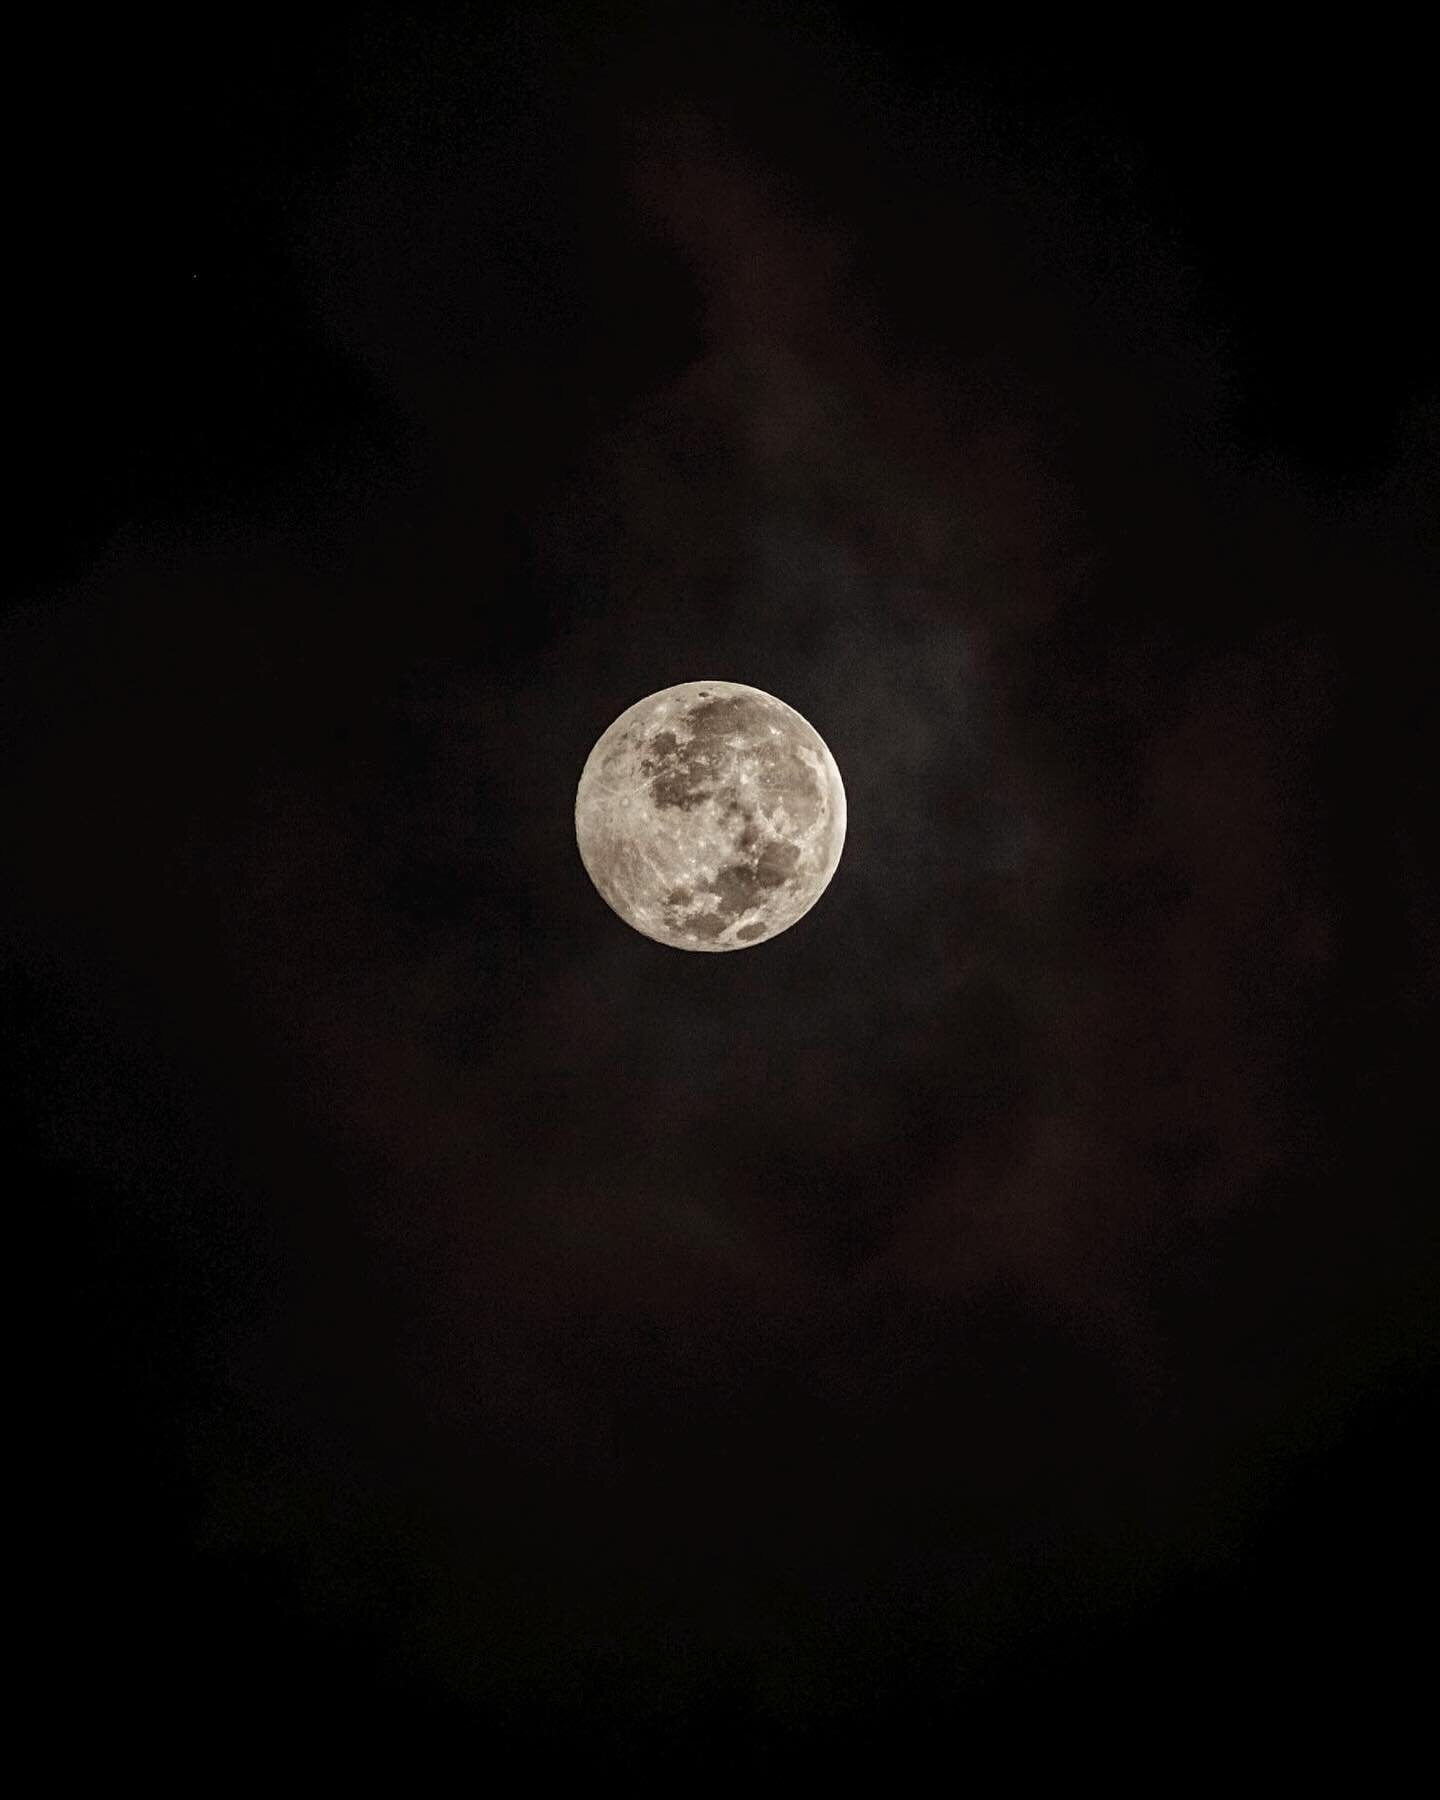 Today&rsquo;s full moon represents balance. Use today to observe the nature of things:

Earth
Relationships
Work/Play
Inner World
Rituals and Routines

Where could you notice and allow more balance within these areas of your life? Remember, balance d